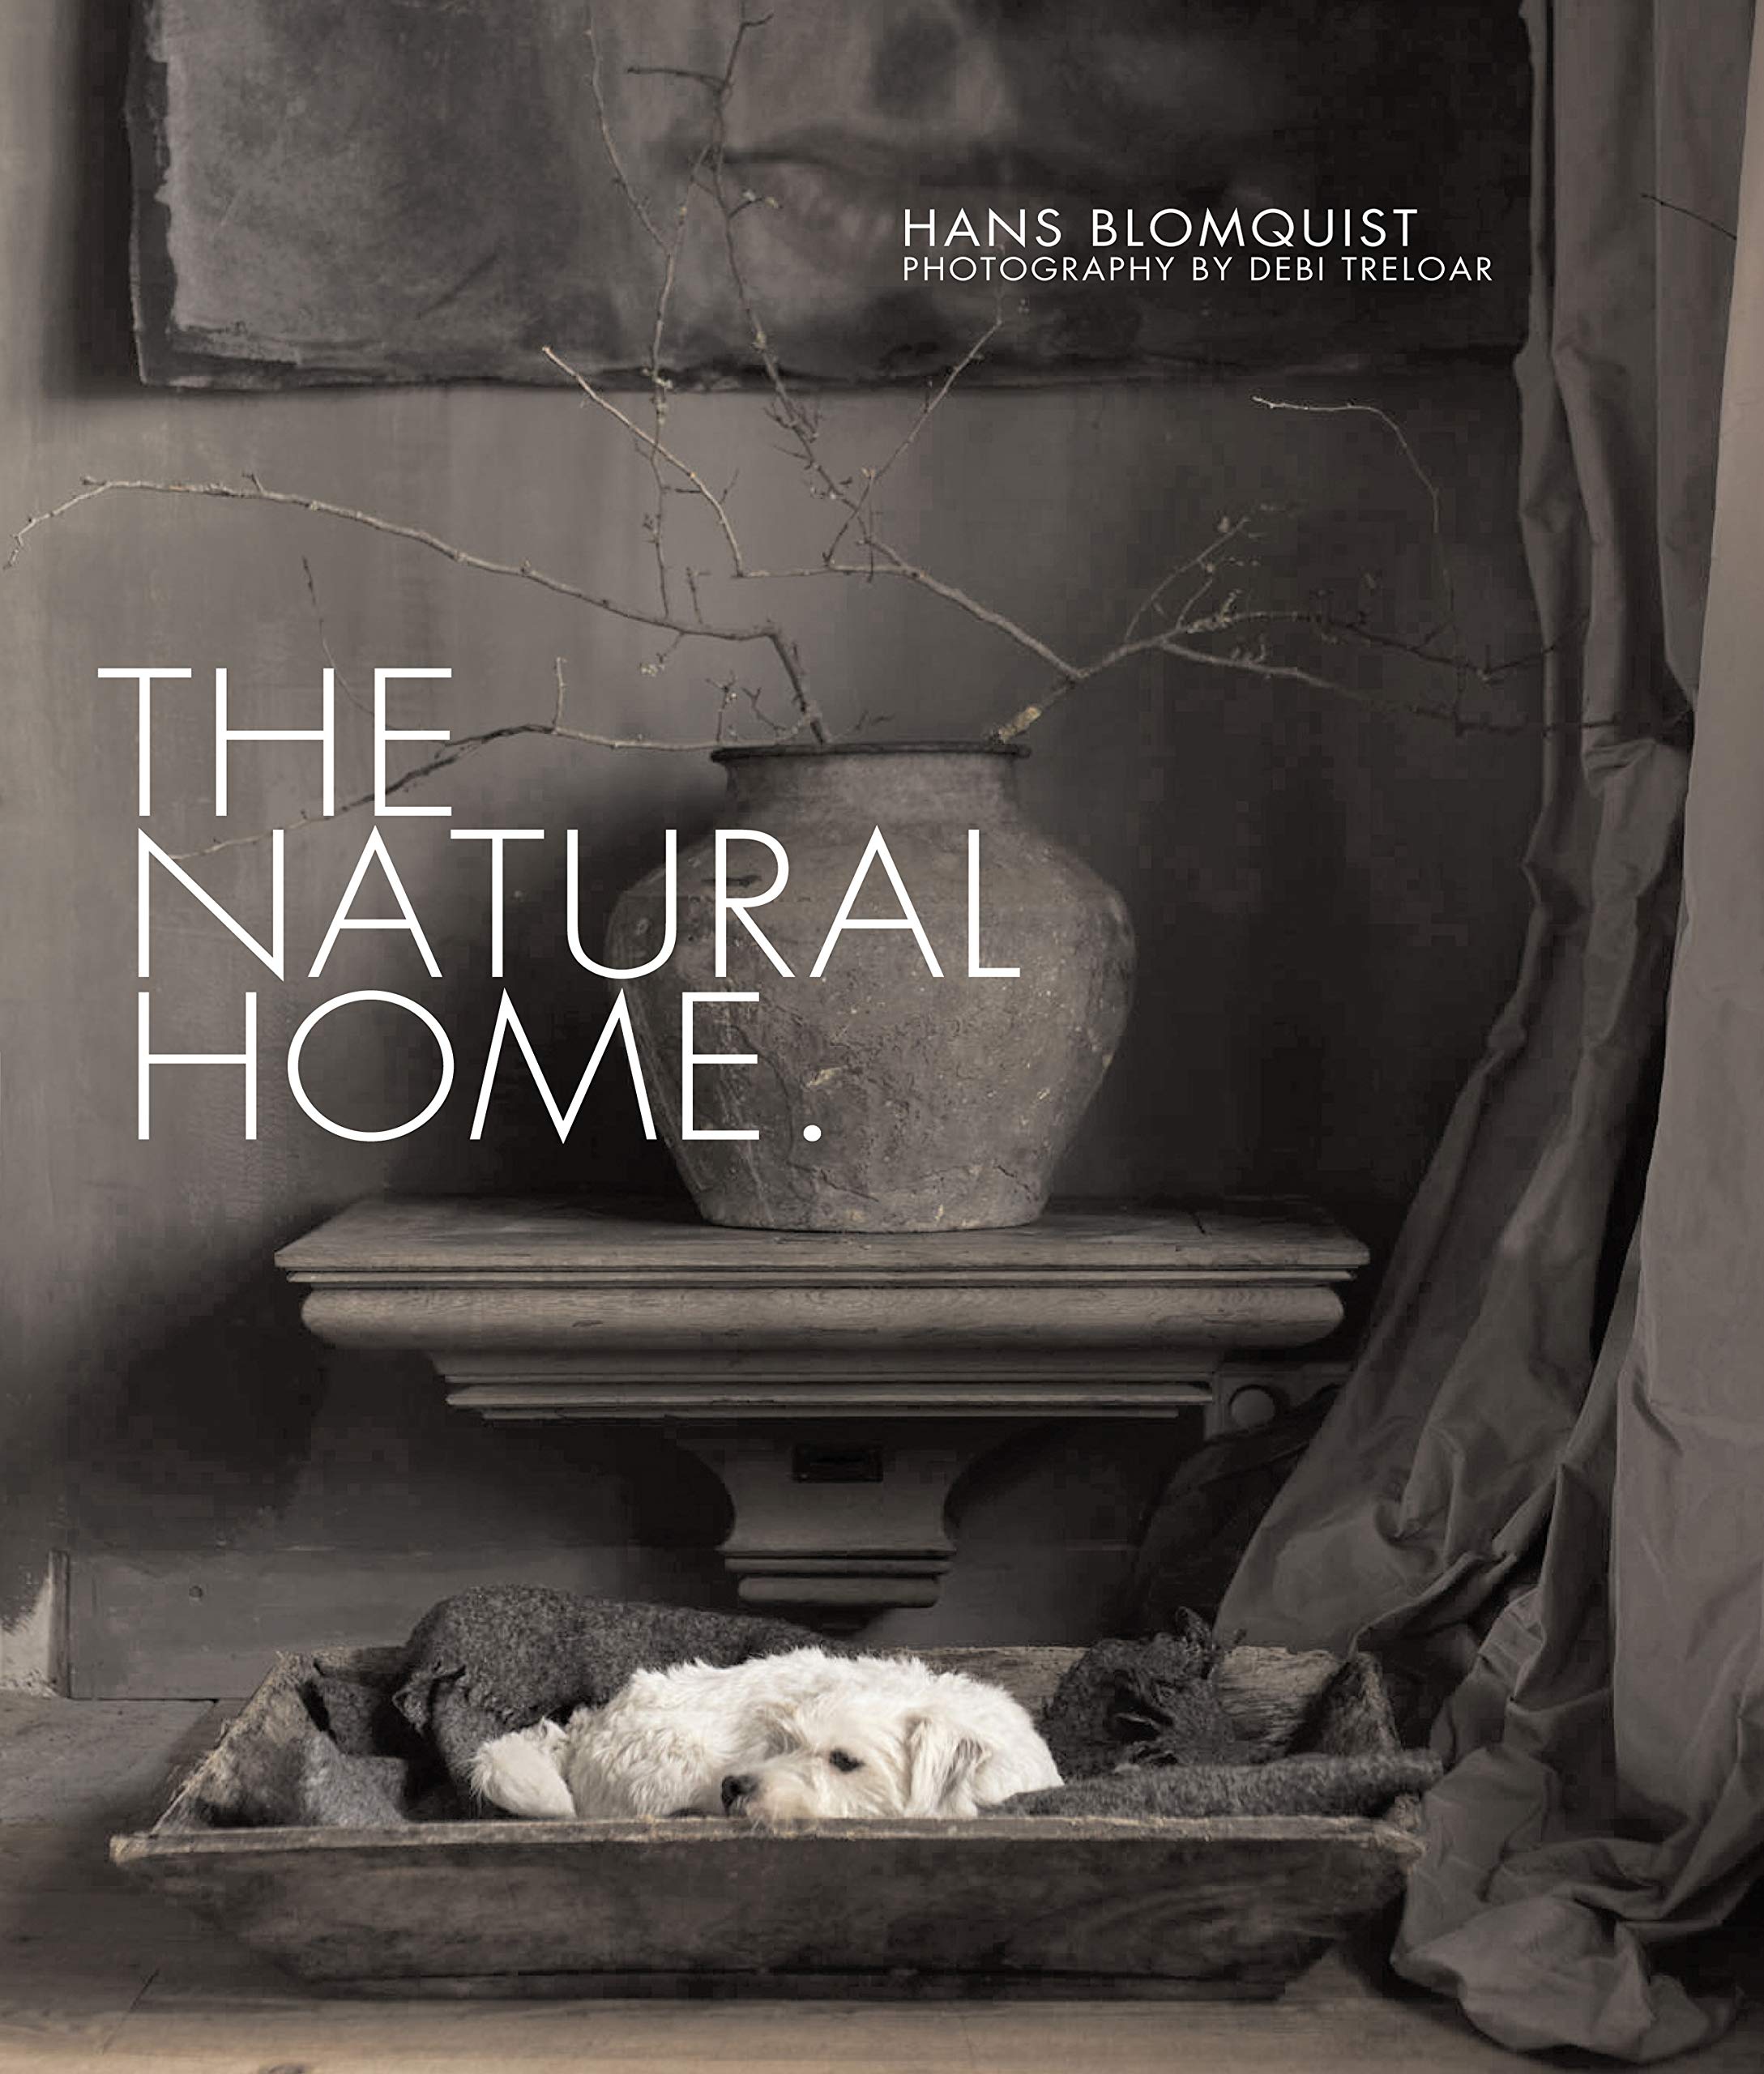 The Natural Home - Hans Blomquist